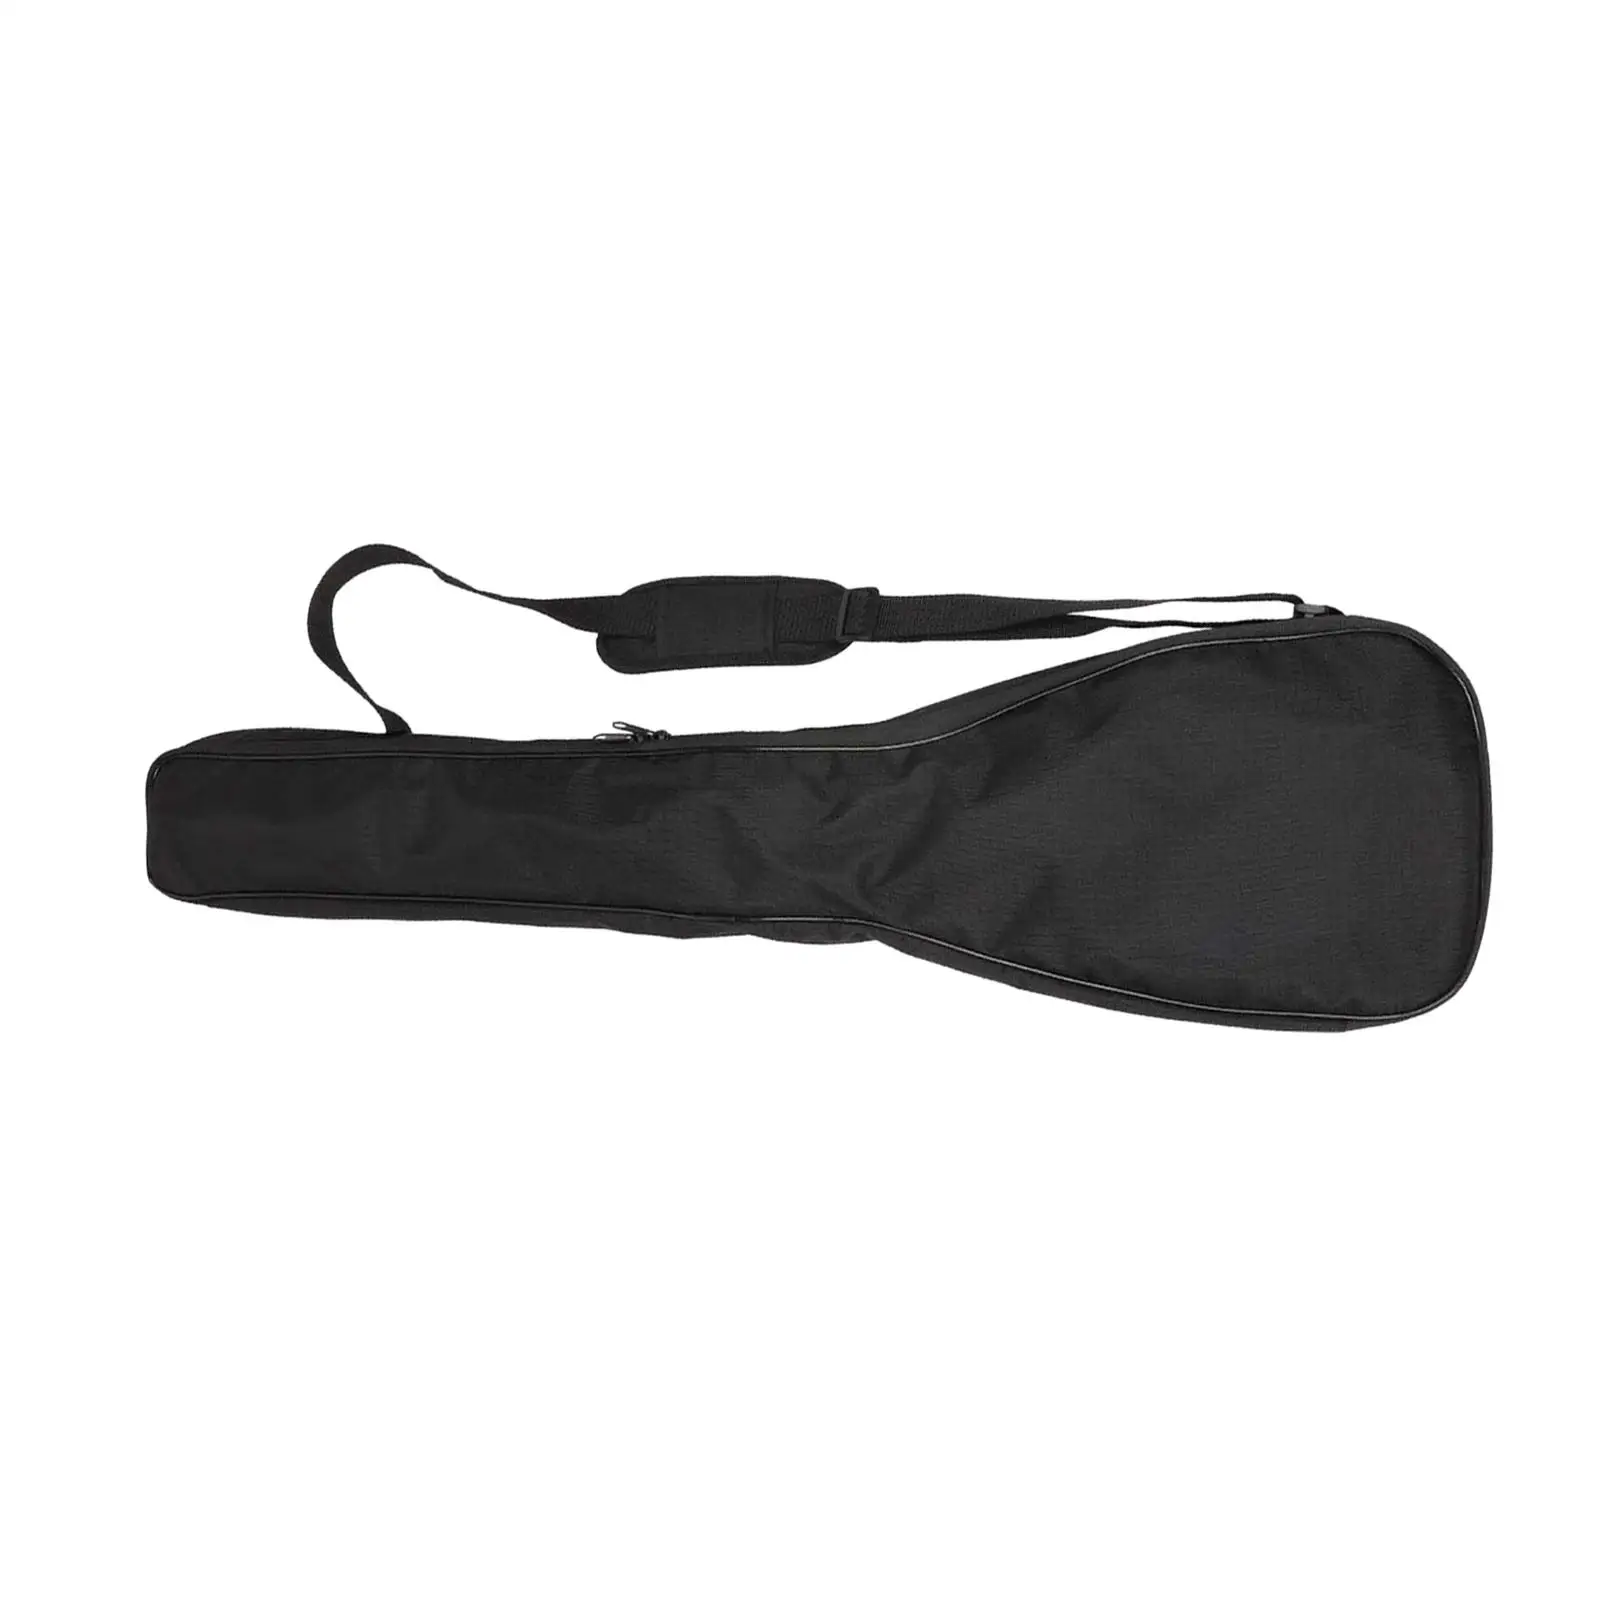 Portable Kayak Paddle Bag for 3 Piece Split Paddle Stylish with Carry Handle, Removable Shoulder Strap